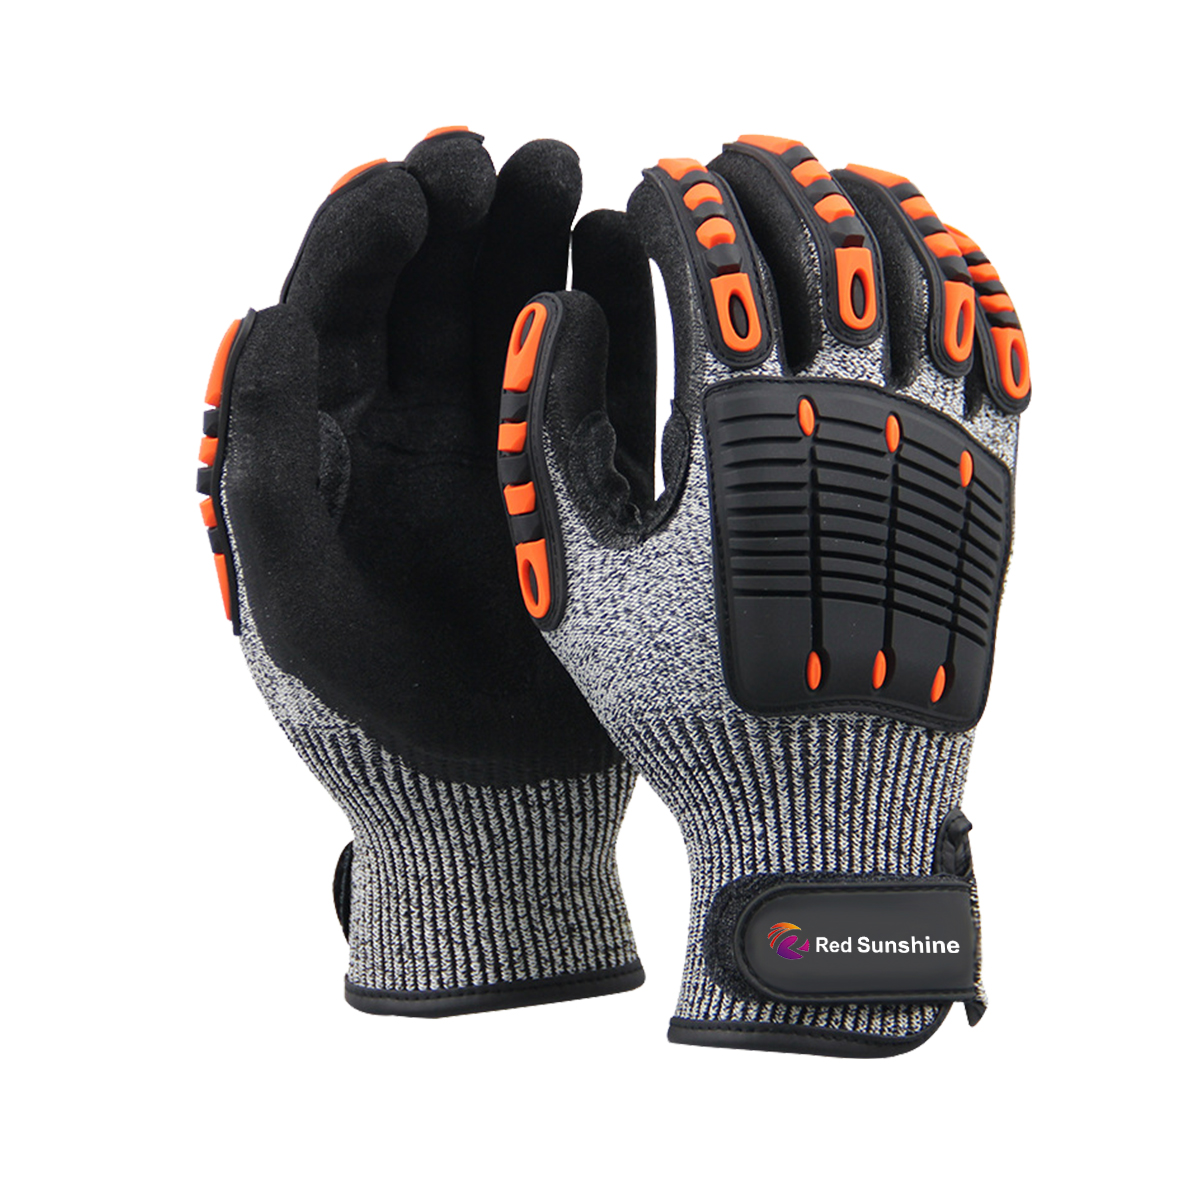 High impact TPR knuckle protect anti vibration mechanical gloves